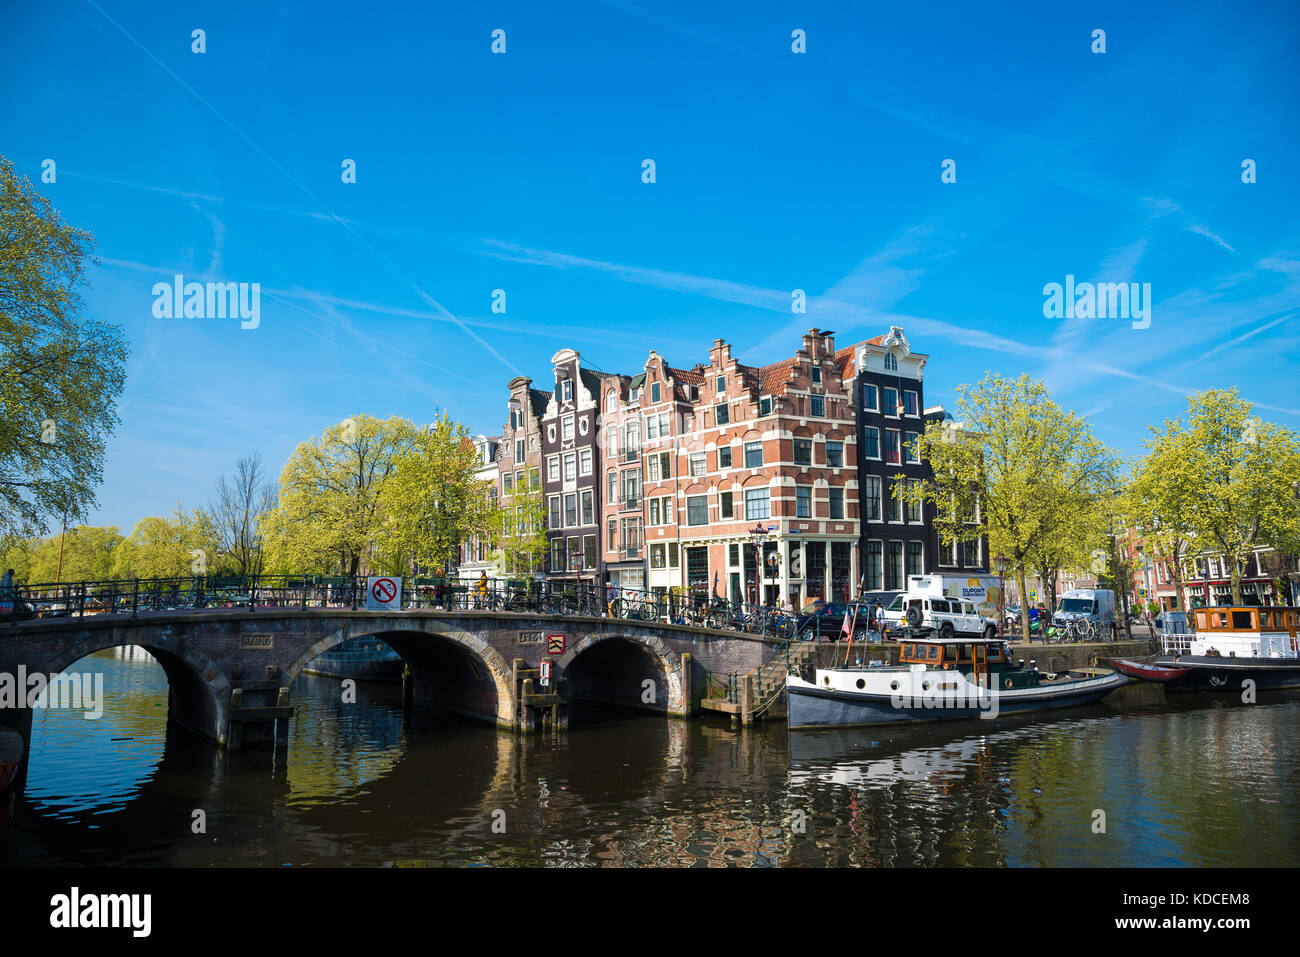 Amsterdam, Netherlands - April 20, 2017: The corner of Brouwersgracht and Prinsengracht in Amsterdam, Europe Stock Photo